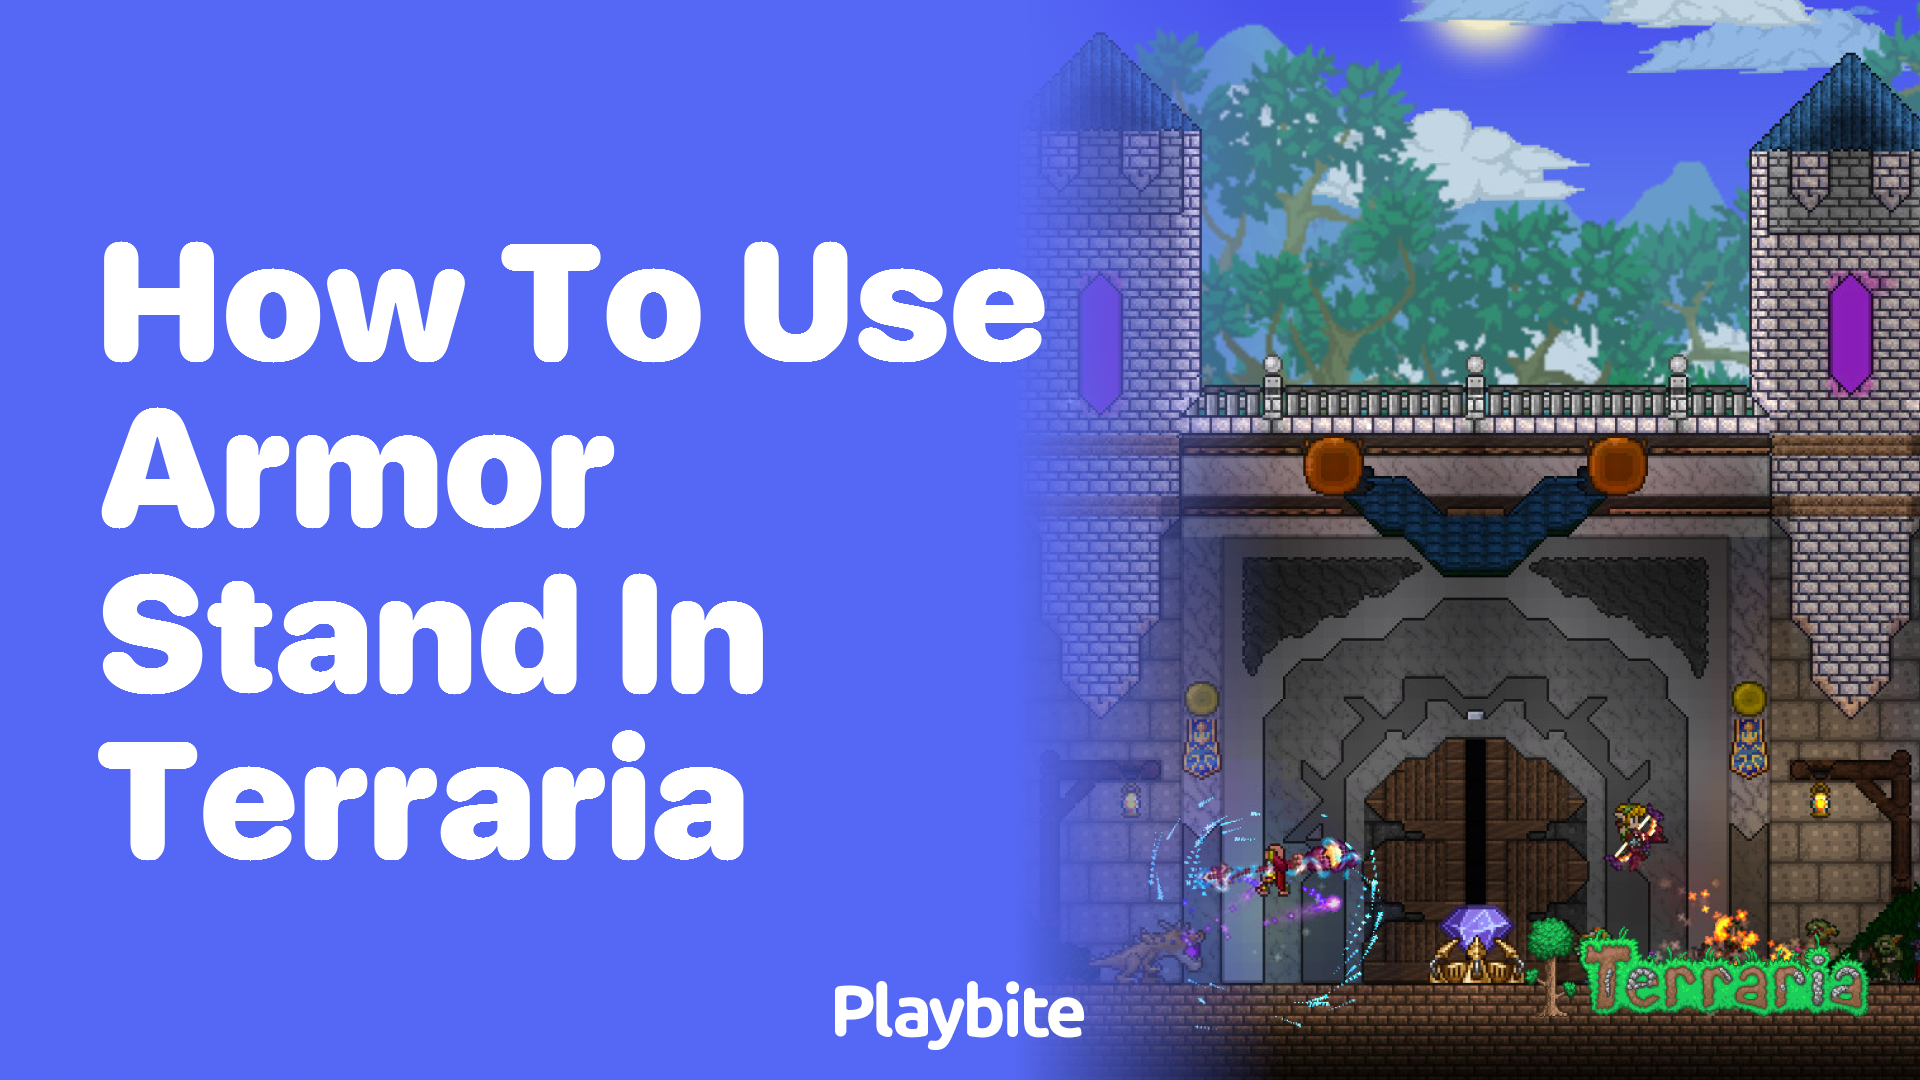 How to Use Armor Stand in Terraria